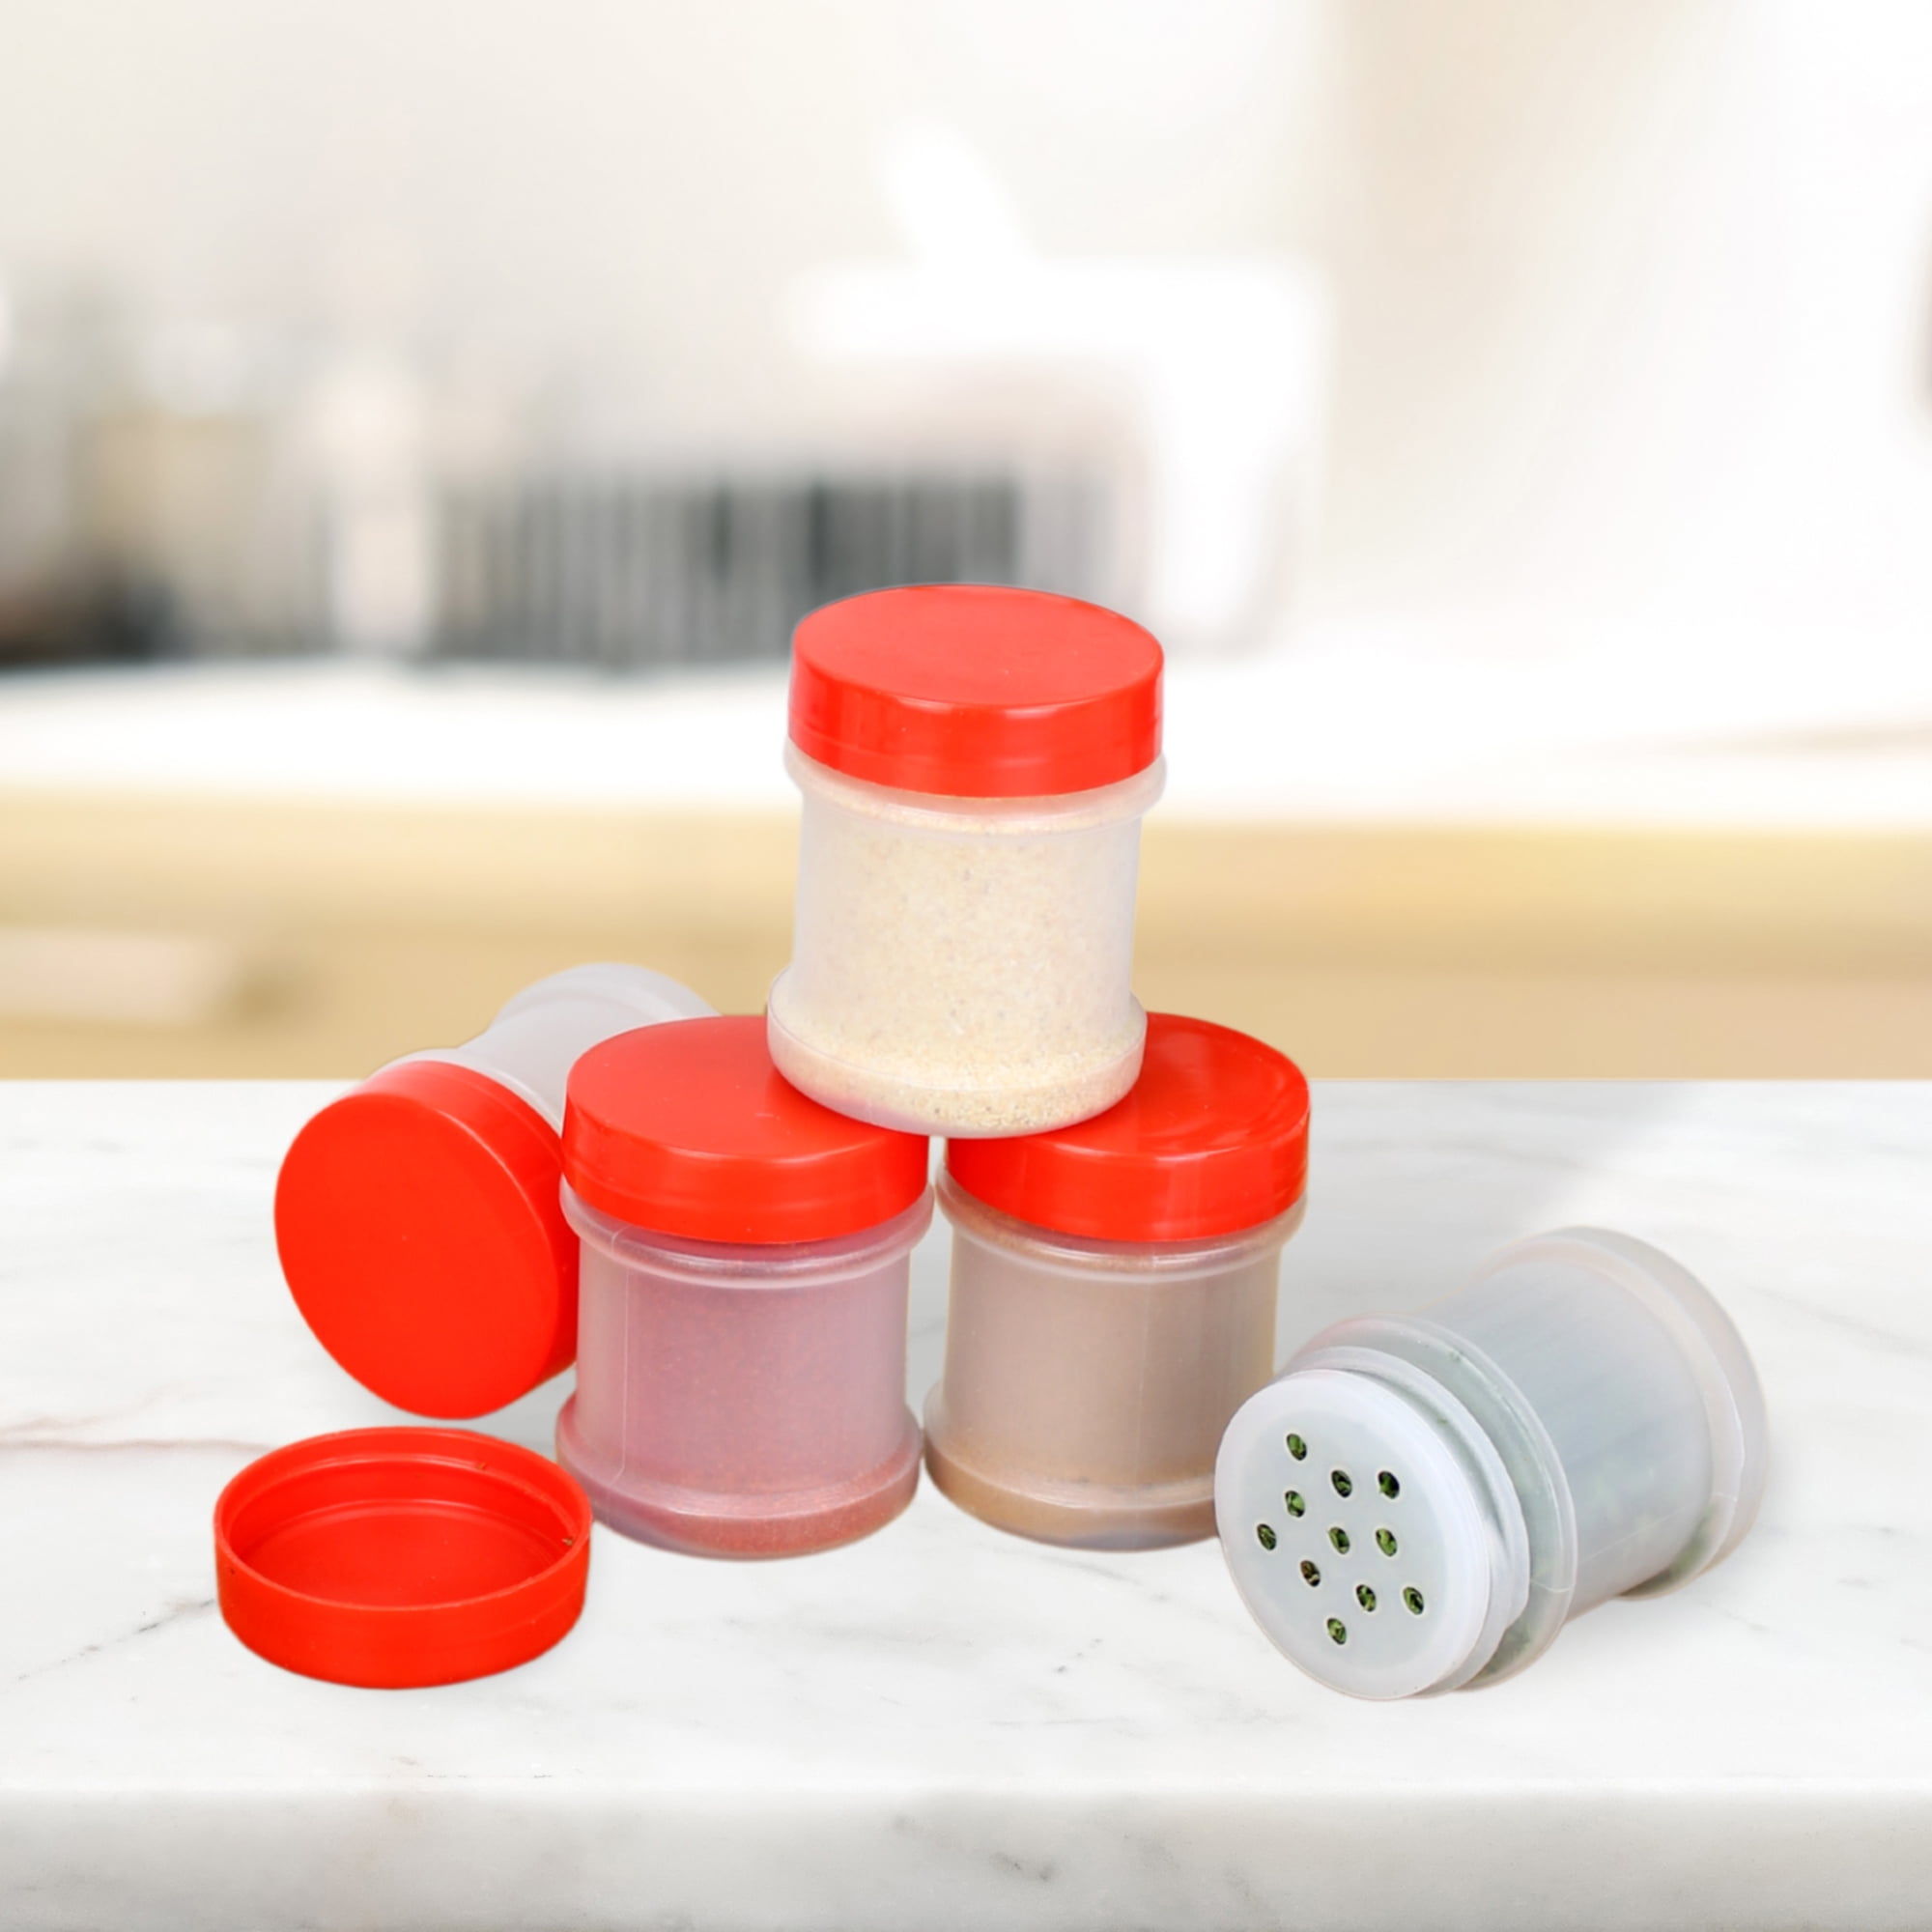 Wholesale 2oz 3oz 6oz 8oz plastic spice jars with sifter and cap